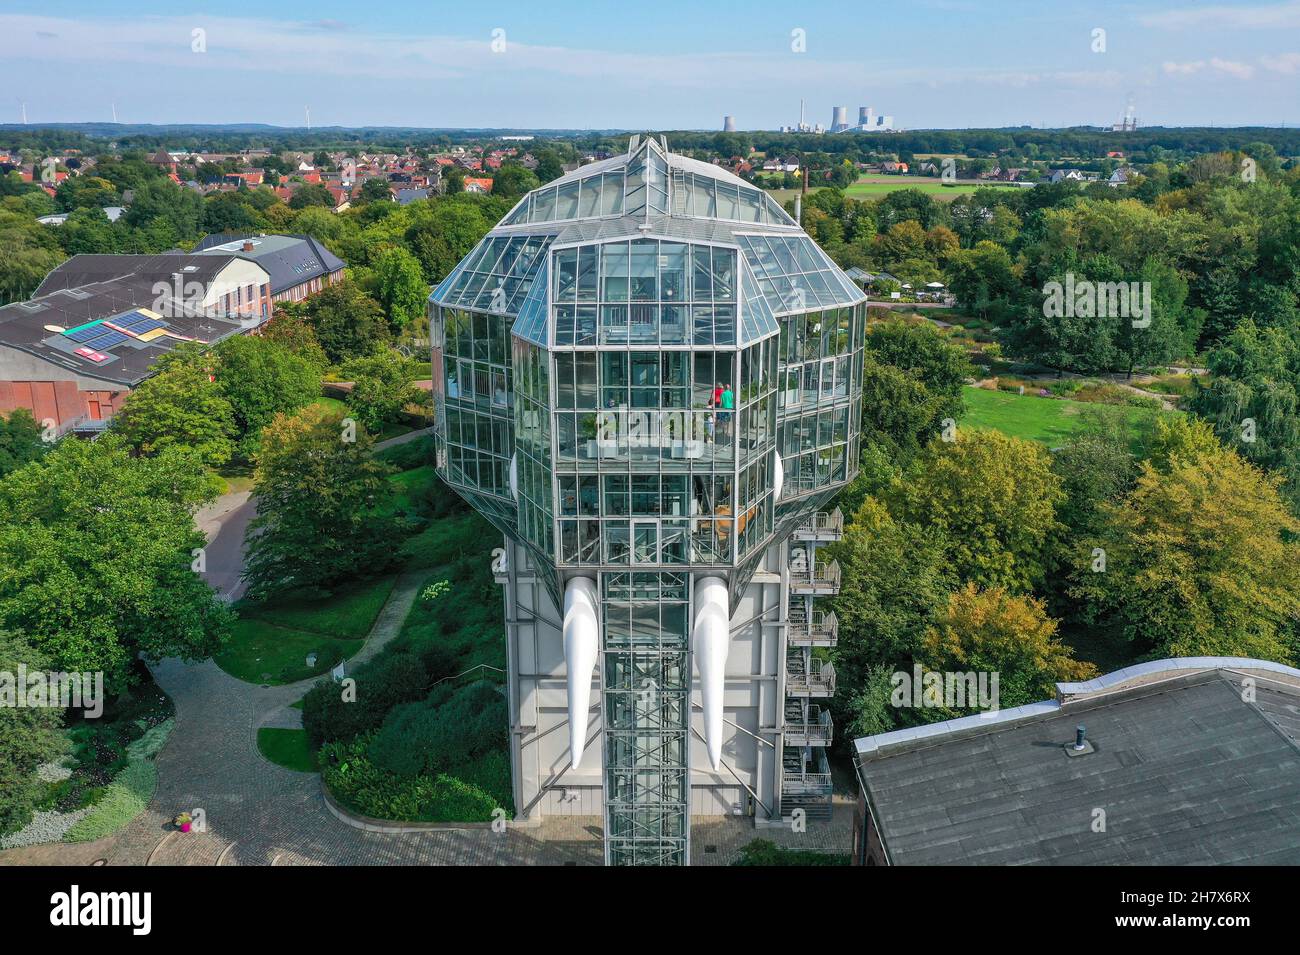 Aerial Photo Of Hamm High Resolution Stock Photography and Images - Alamy